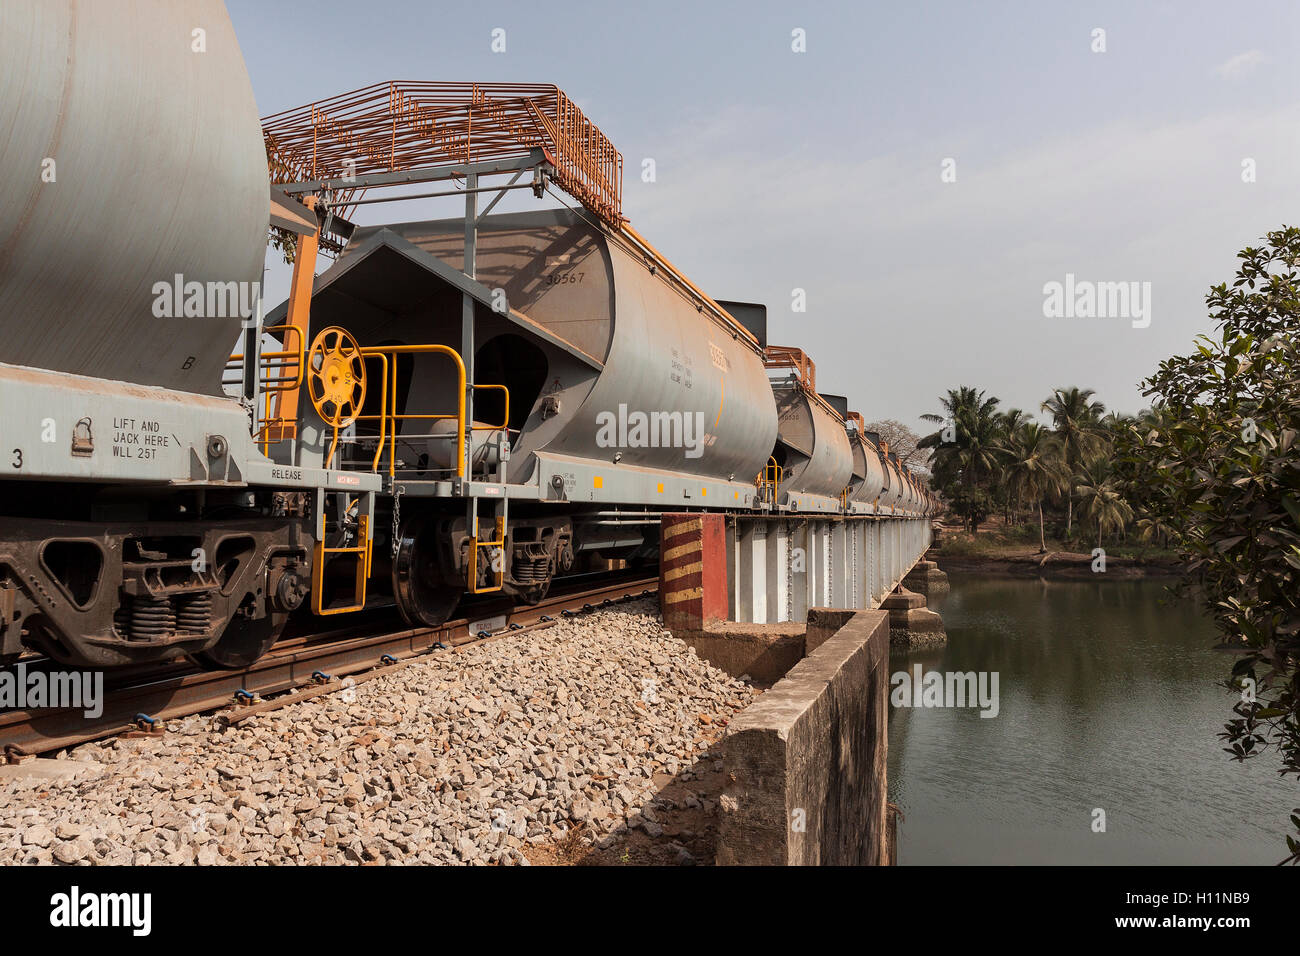 Port operations for managing and transporting iron ore. New wagons near port area with iron ore before loading onto ships for overseas markets. Stock Photo